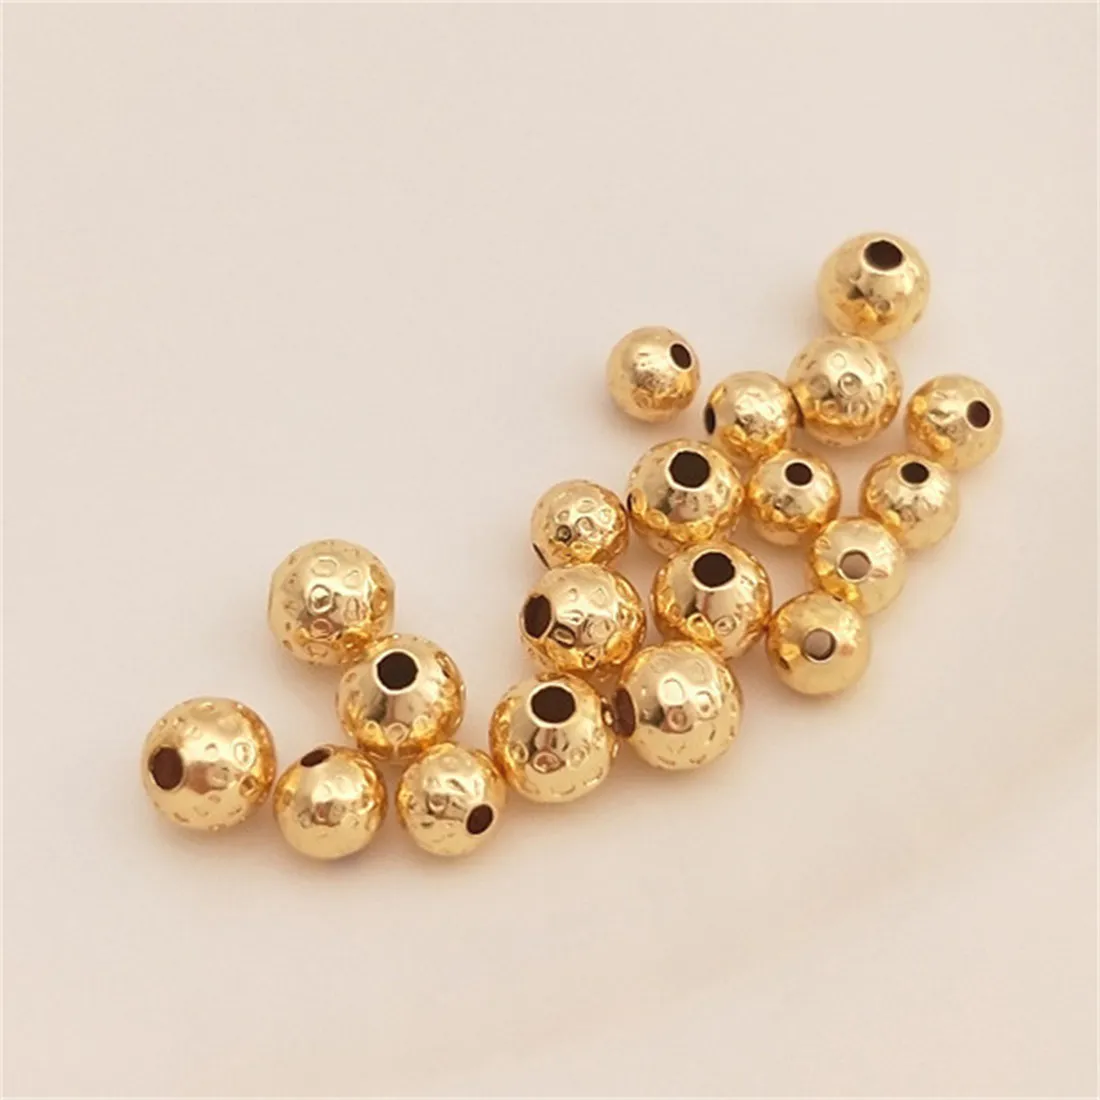 Patterned Beads 14K Gold-coated Embossed Beads Scattered Beads Handmade Diy Beaded Bracelet Bead Jewelry with Bead Materials